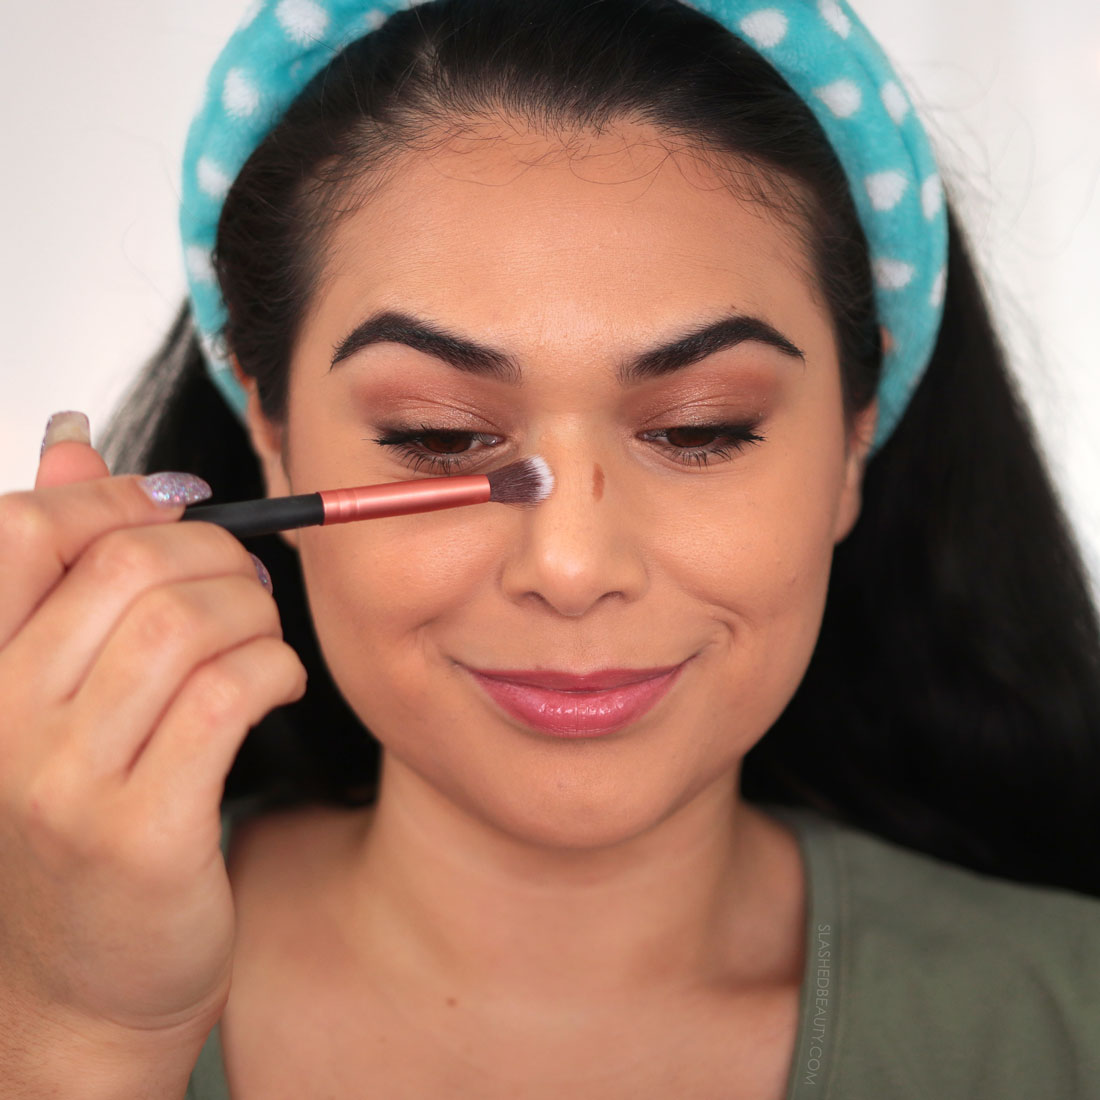 Miranda blending the nose contour with a small blending brush | How to Use a Contour Stick: 5 Tips & Mistakes to Avoid | Slashed Beauty